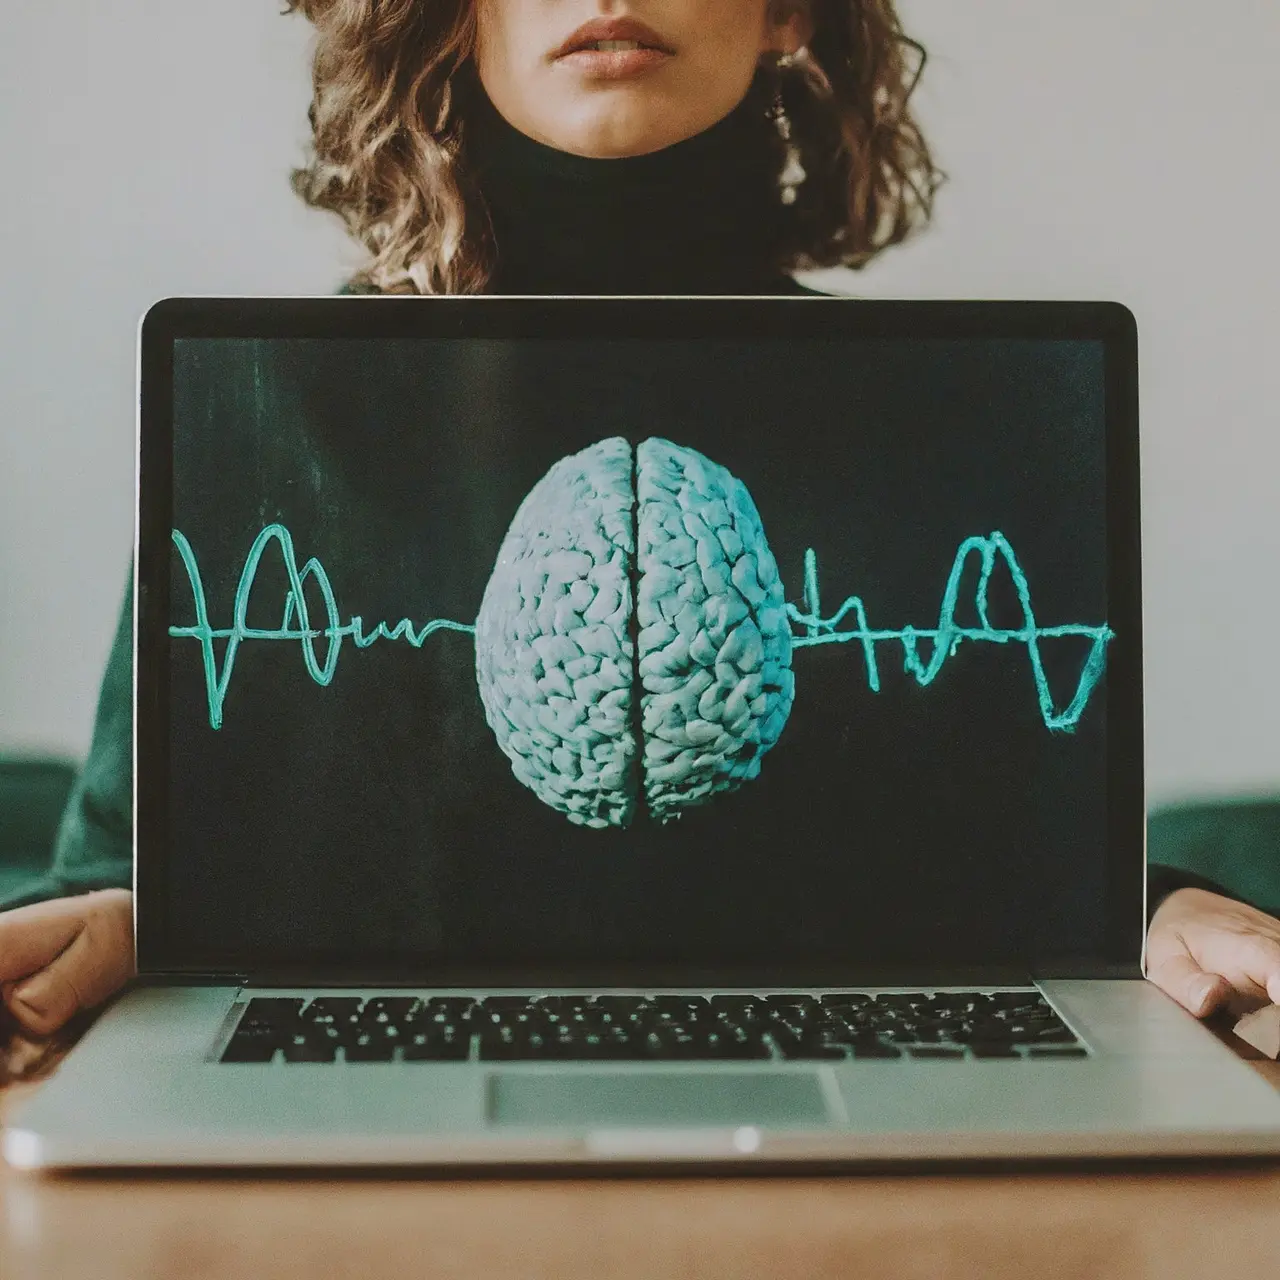 Laptop with brain waves graphic on screen 35mm stock photo